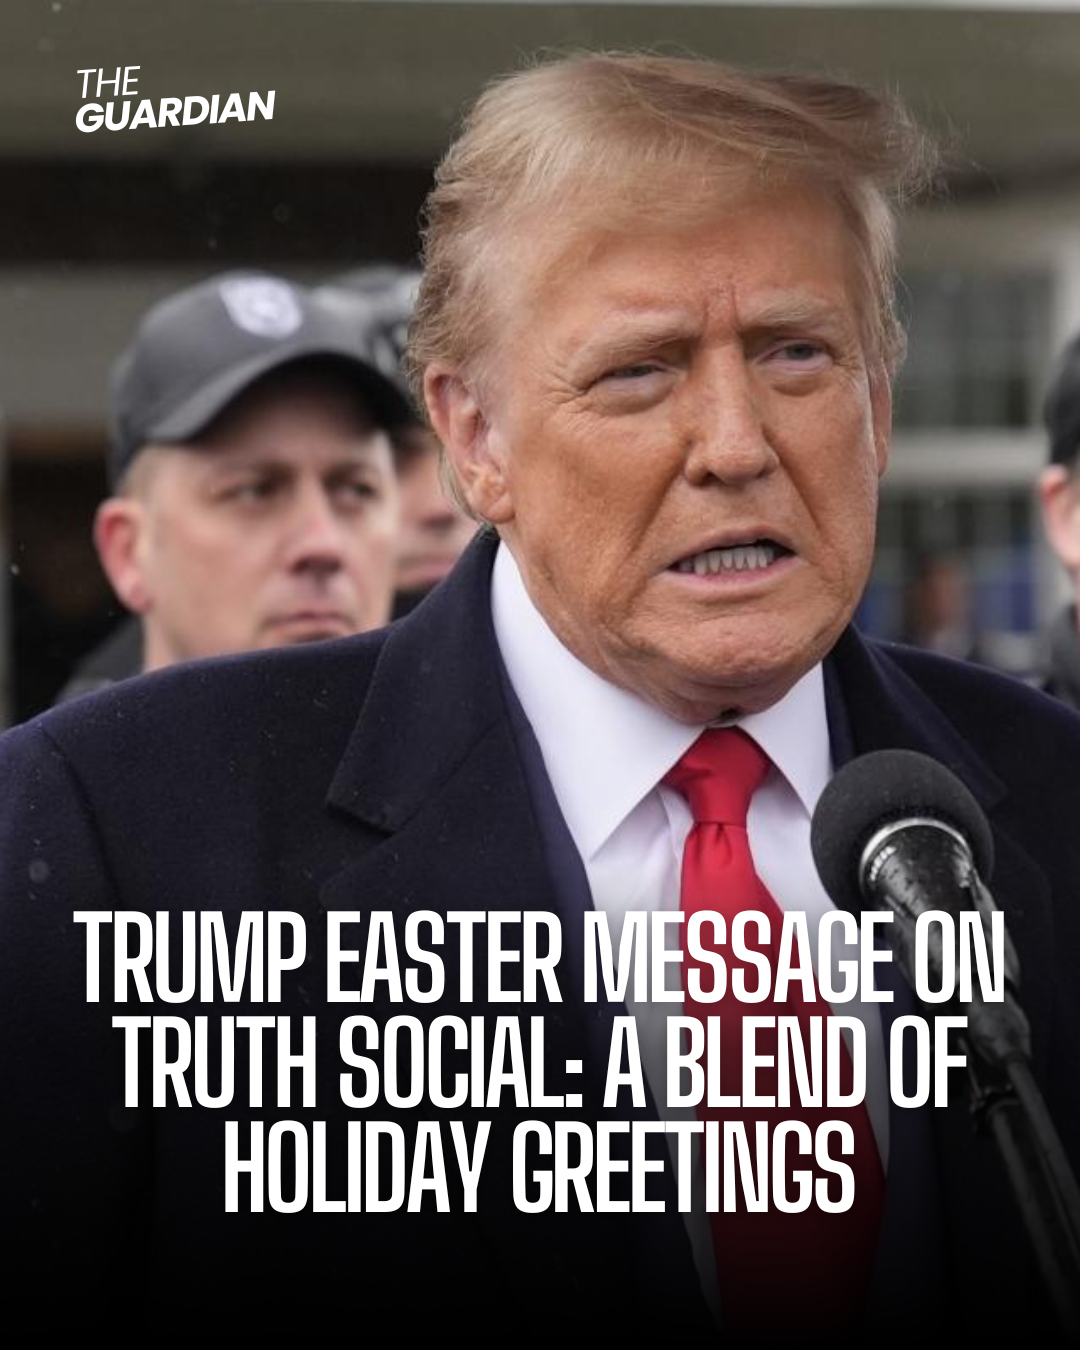 Former President Donald Trump's Easter Sunday post on Truth Social differed from traditional holiday greetings.